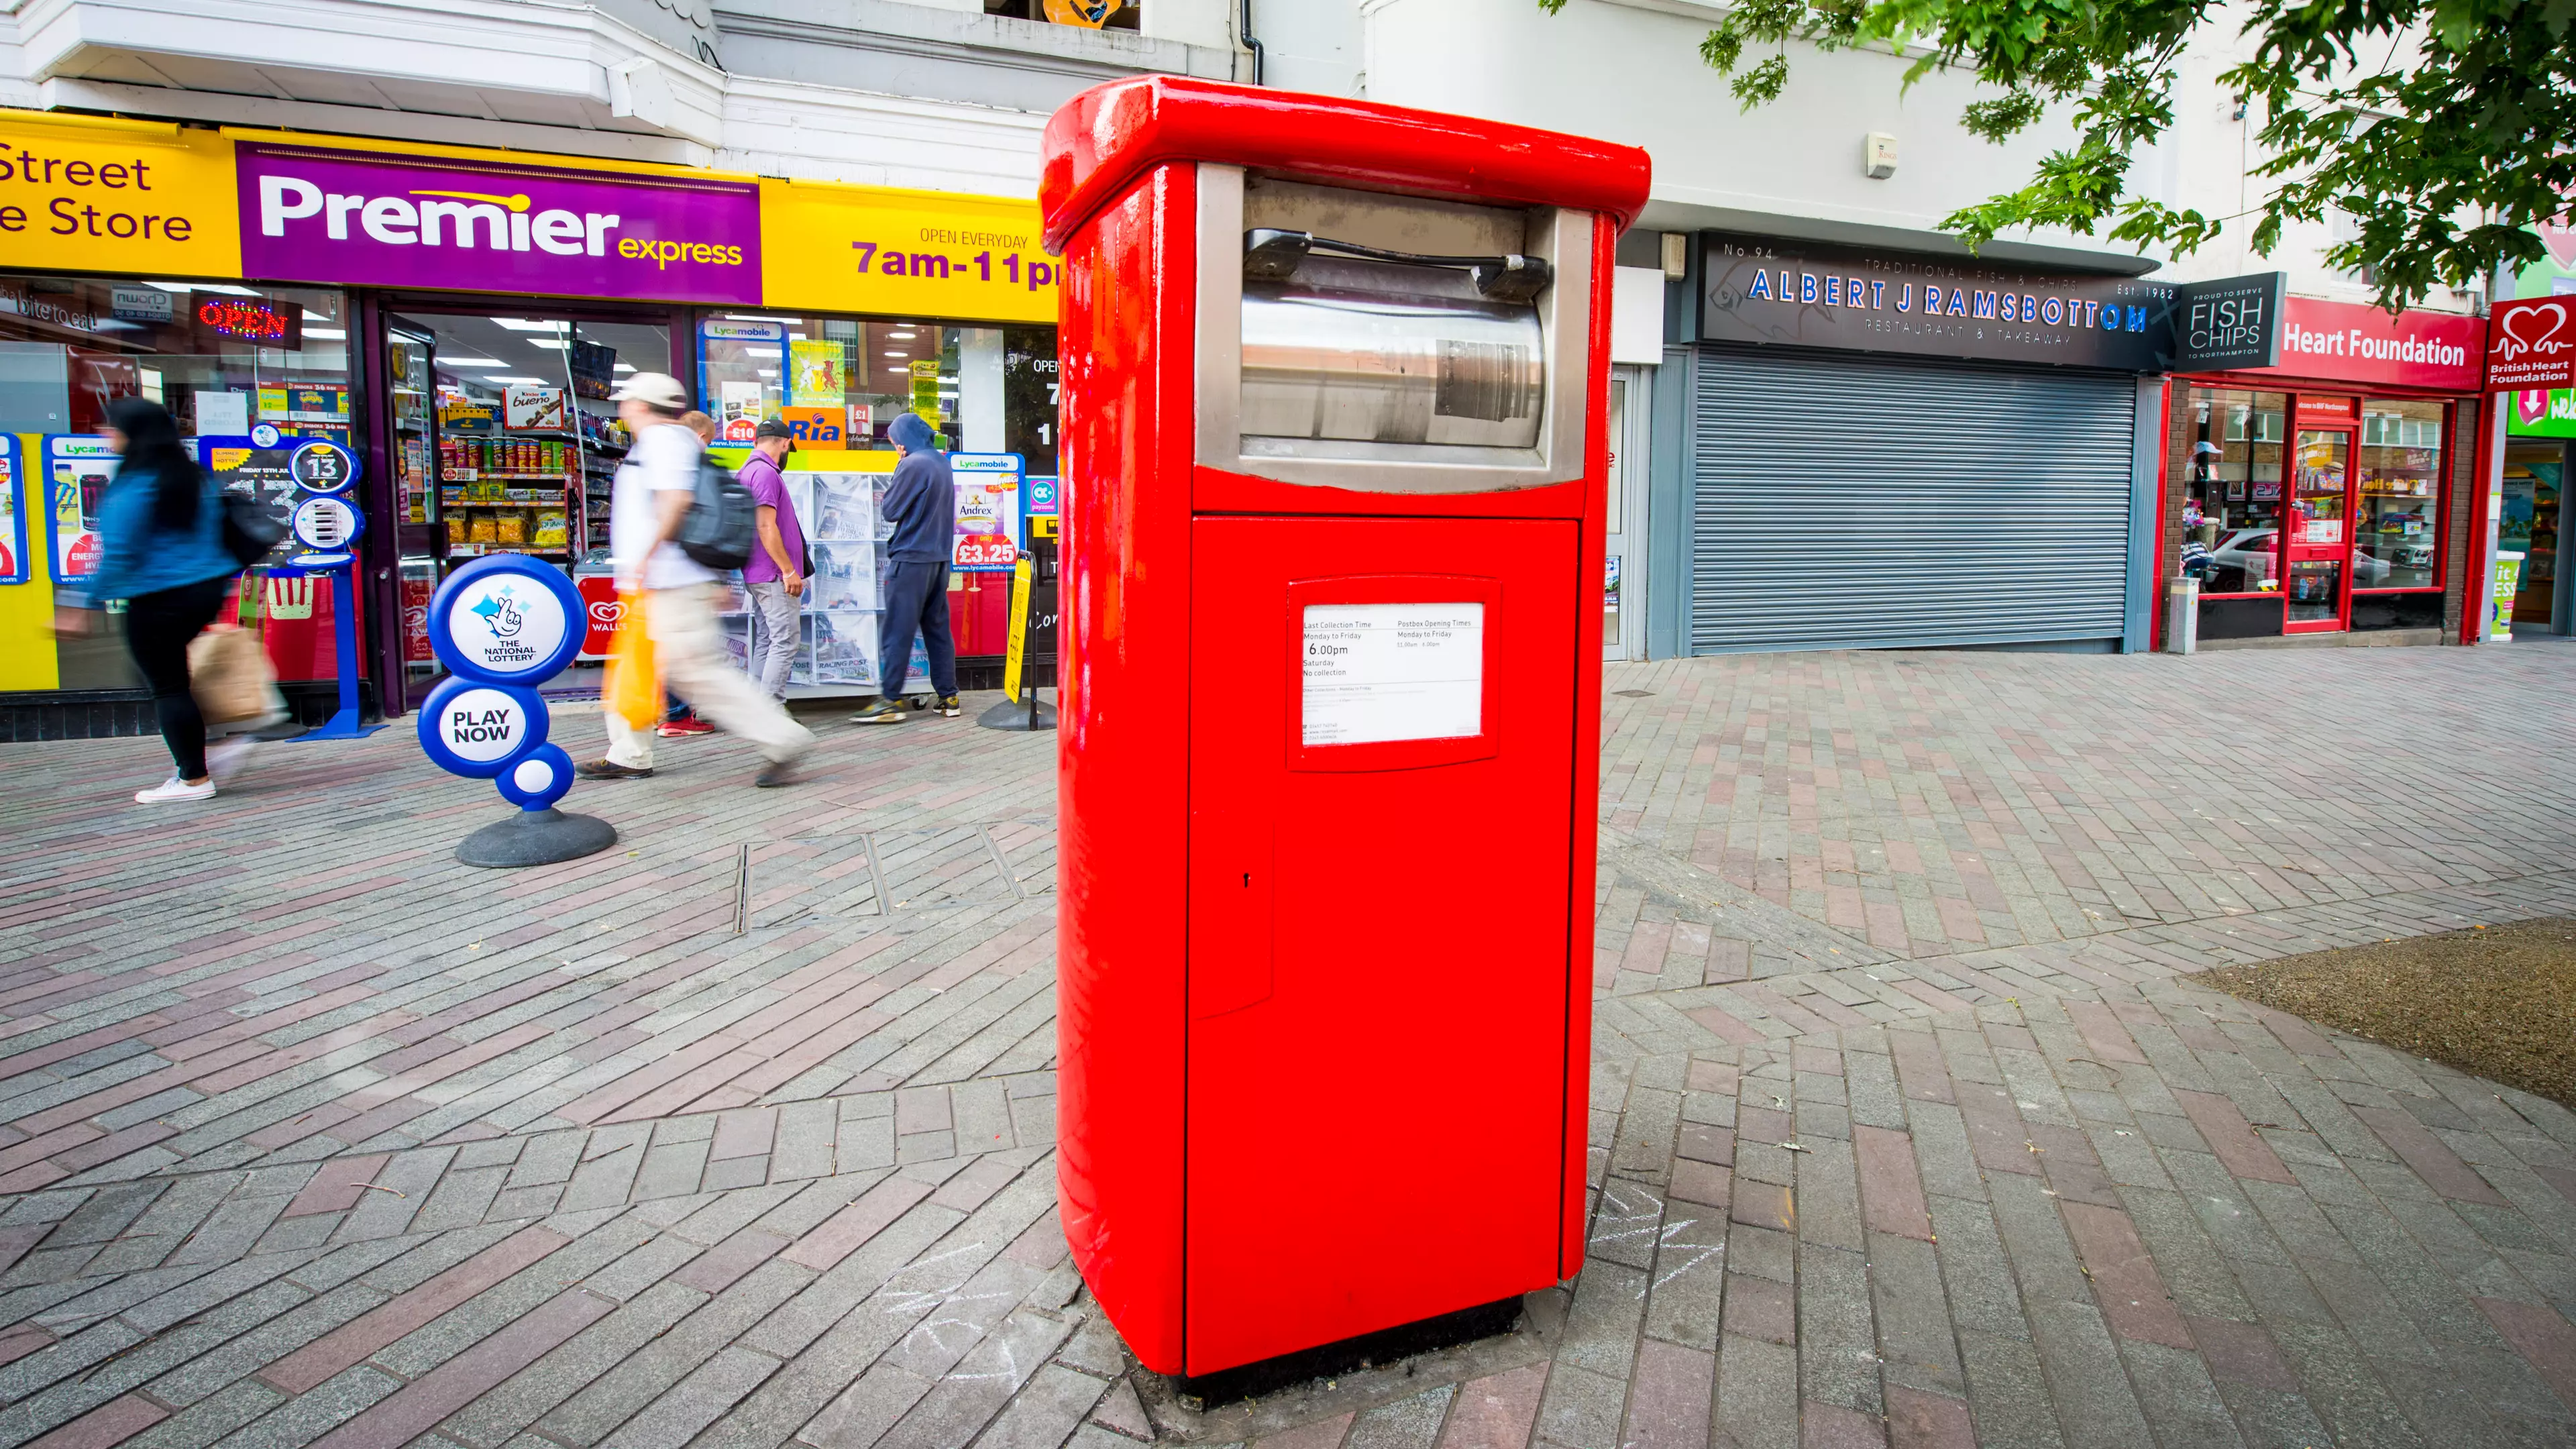 Royal Mail Is Launching Extra Large Postboxes For Parcels And They're A Game Changer